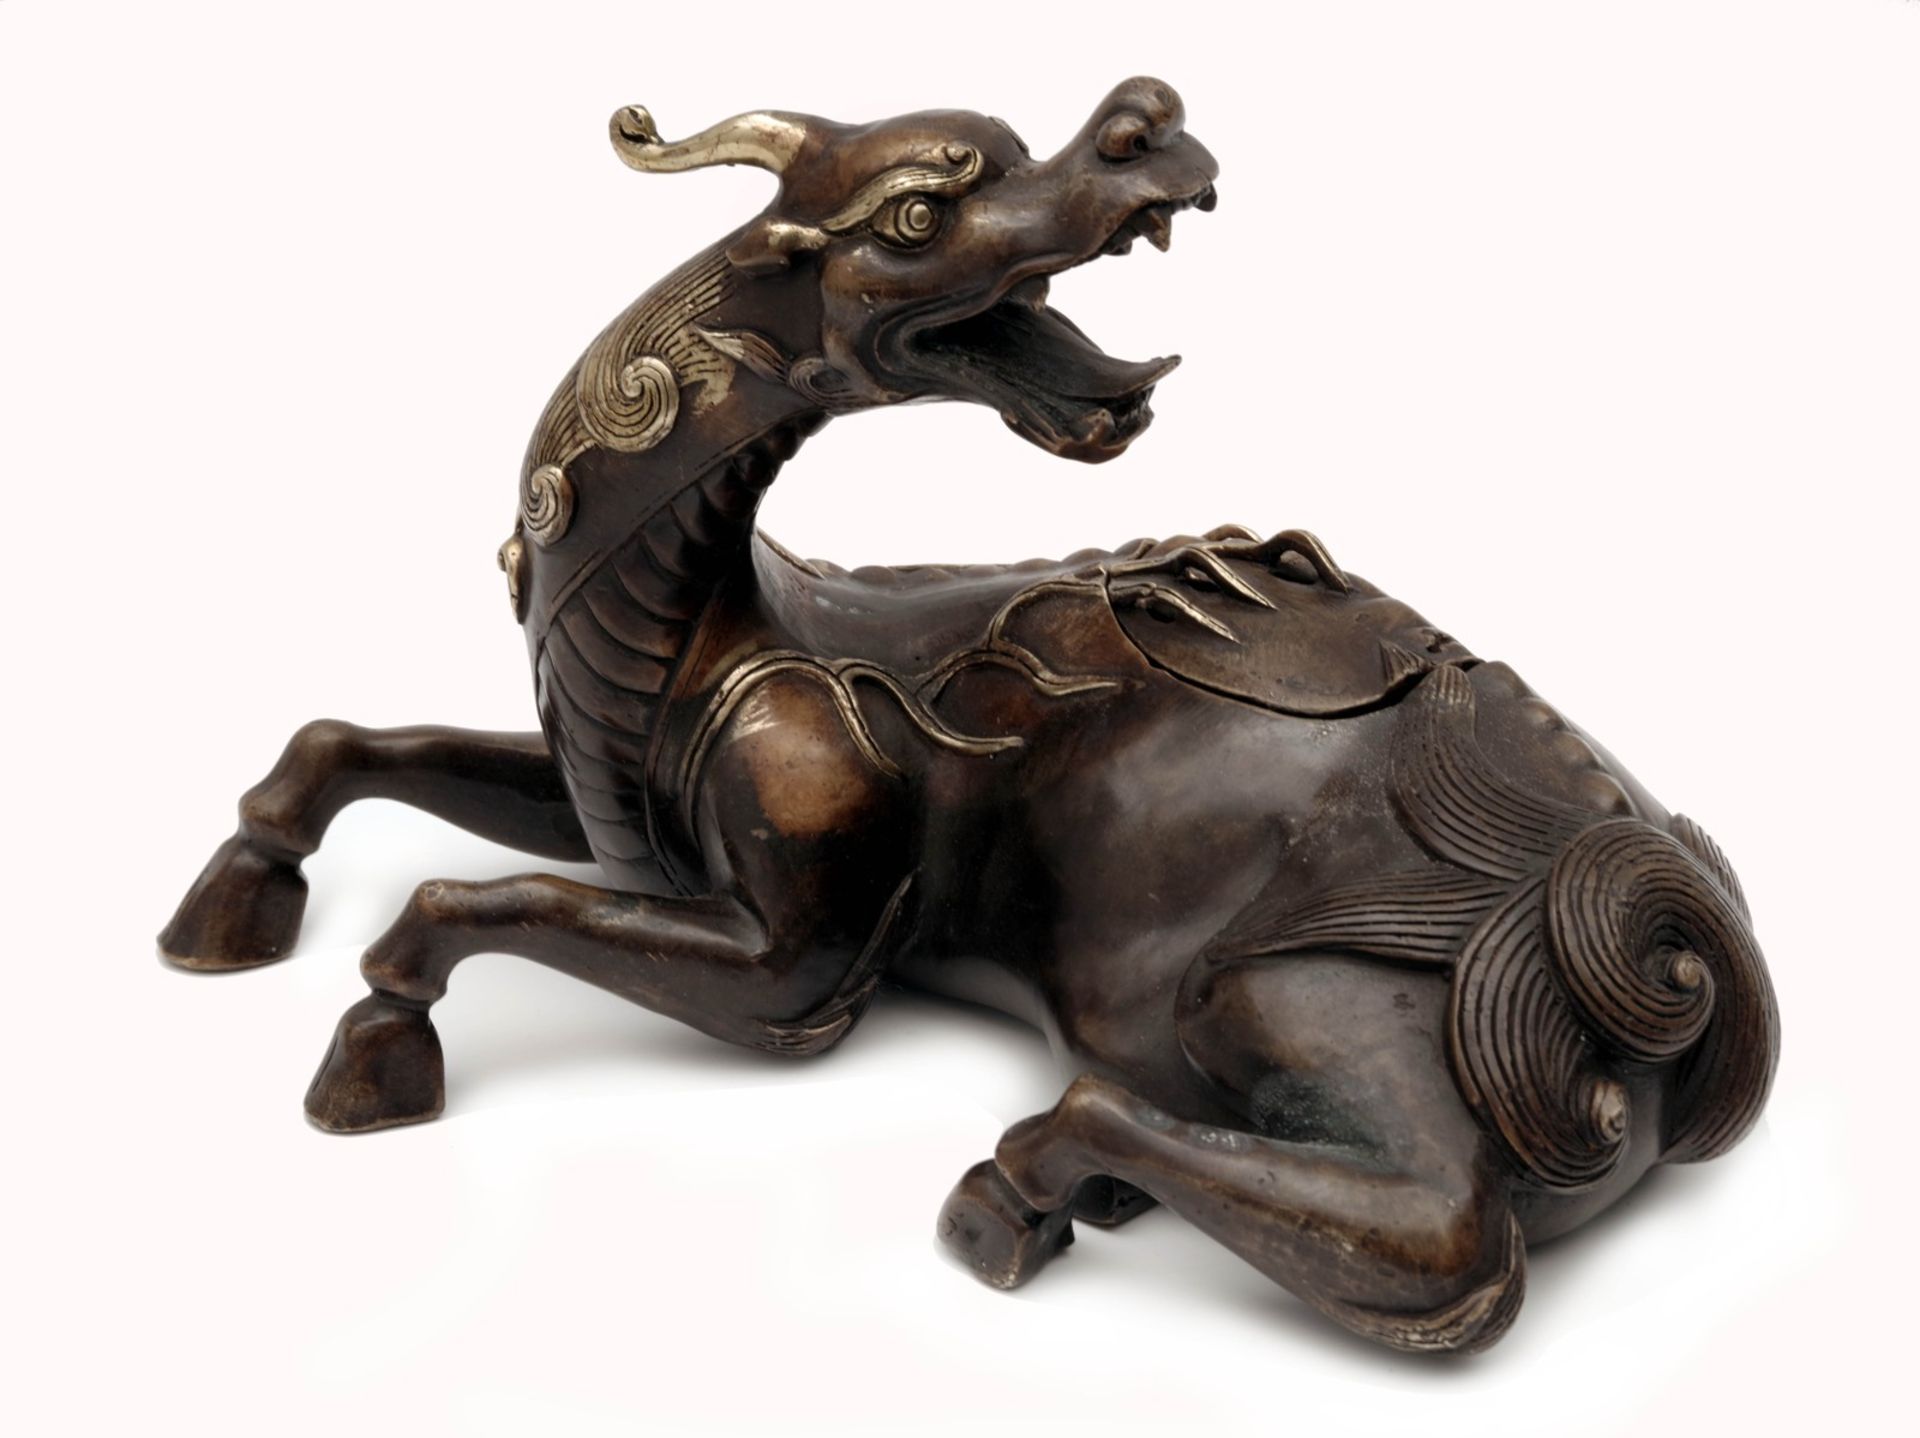 Incense Burner in the Form of a Qilin